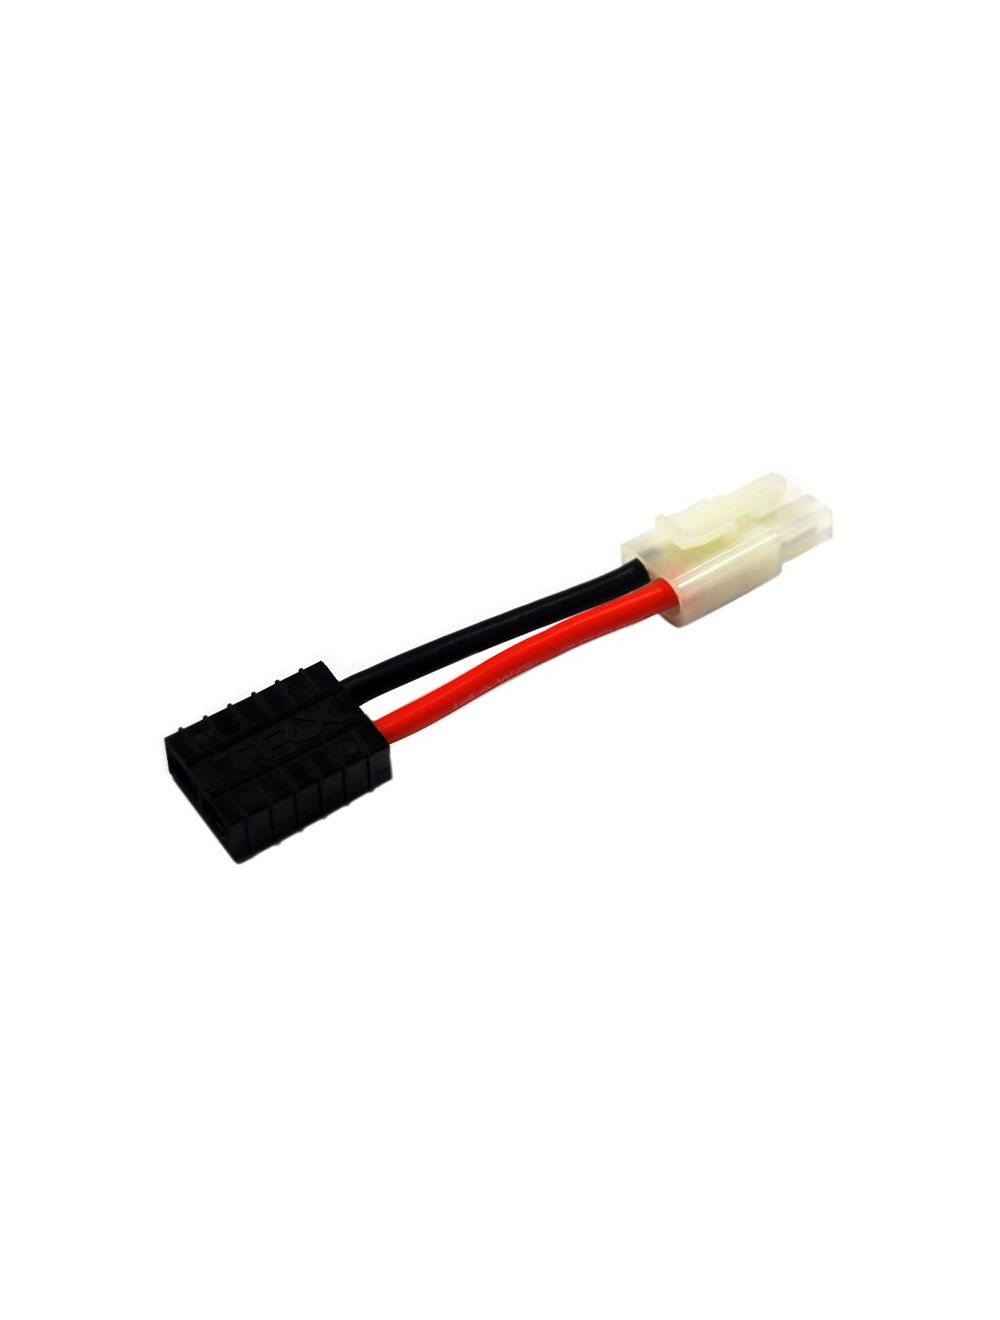 Overlander Male Tamiya to Female Traxxas Conversion lead 2842